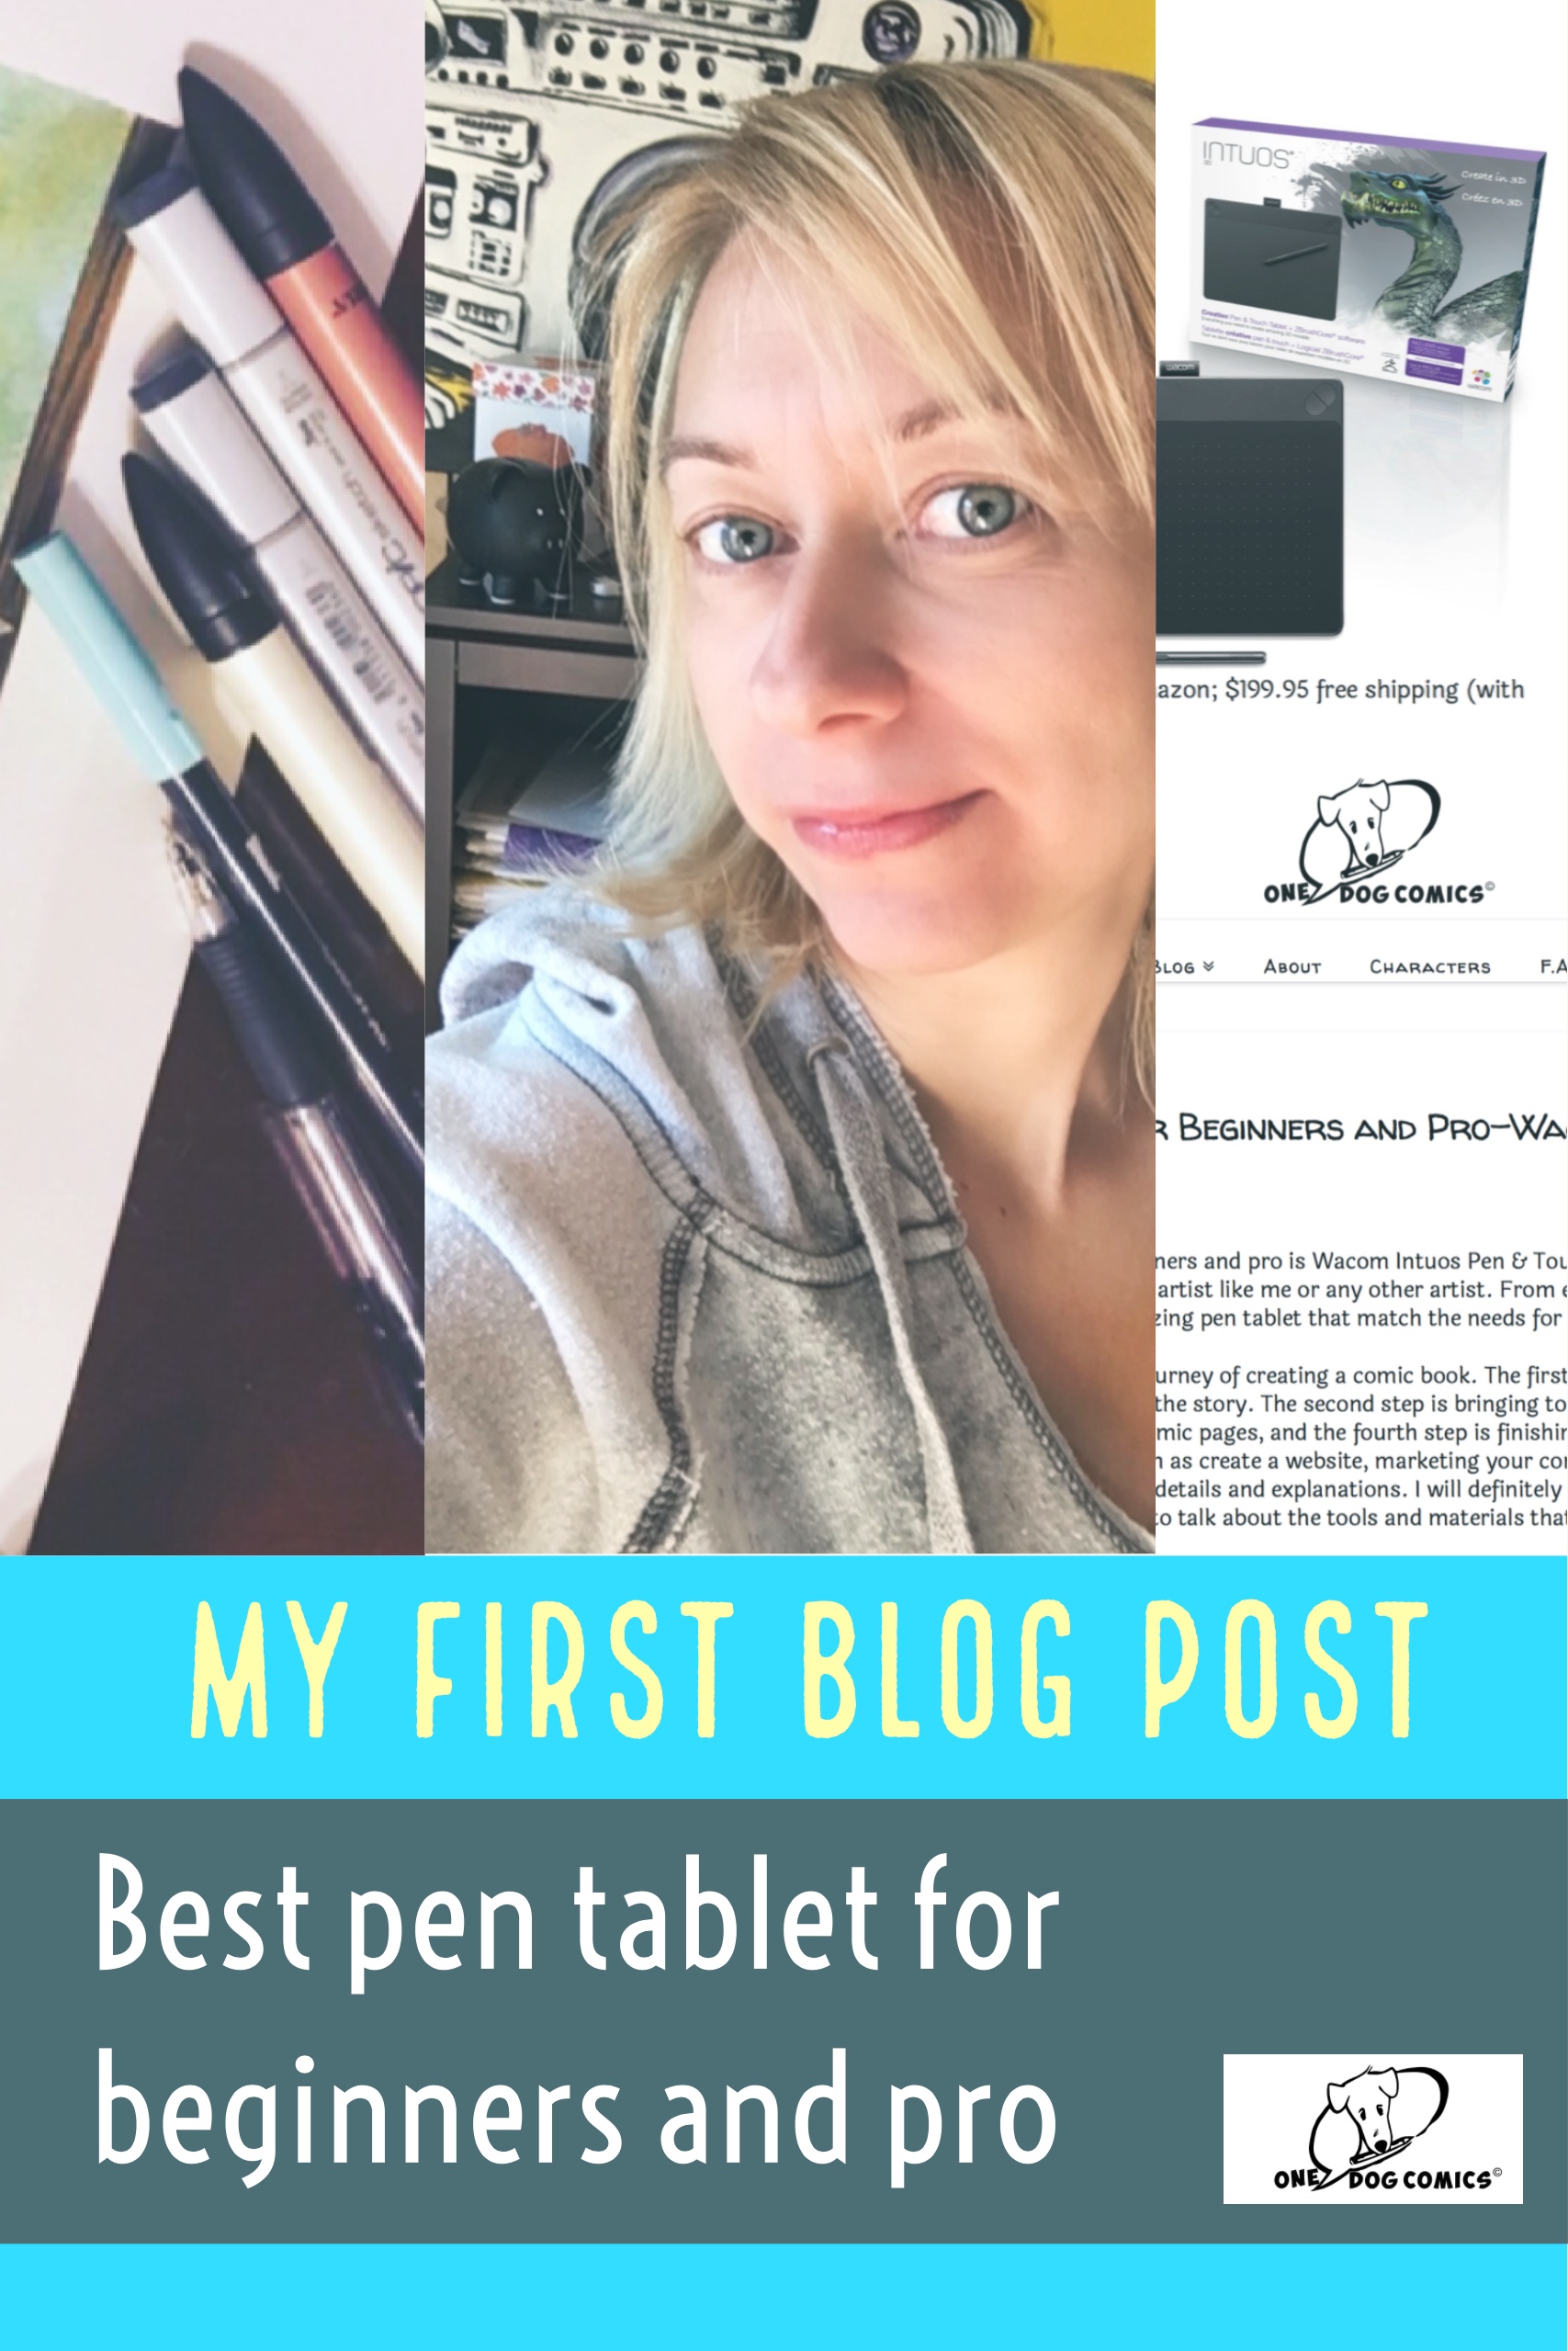 My first blog post best pen tablet for beginners and pro